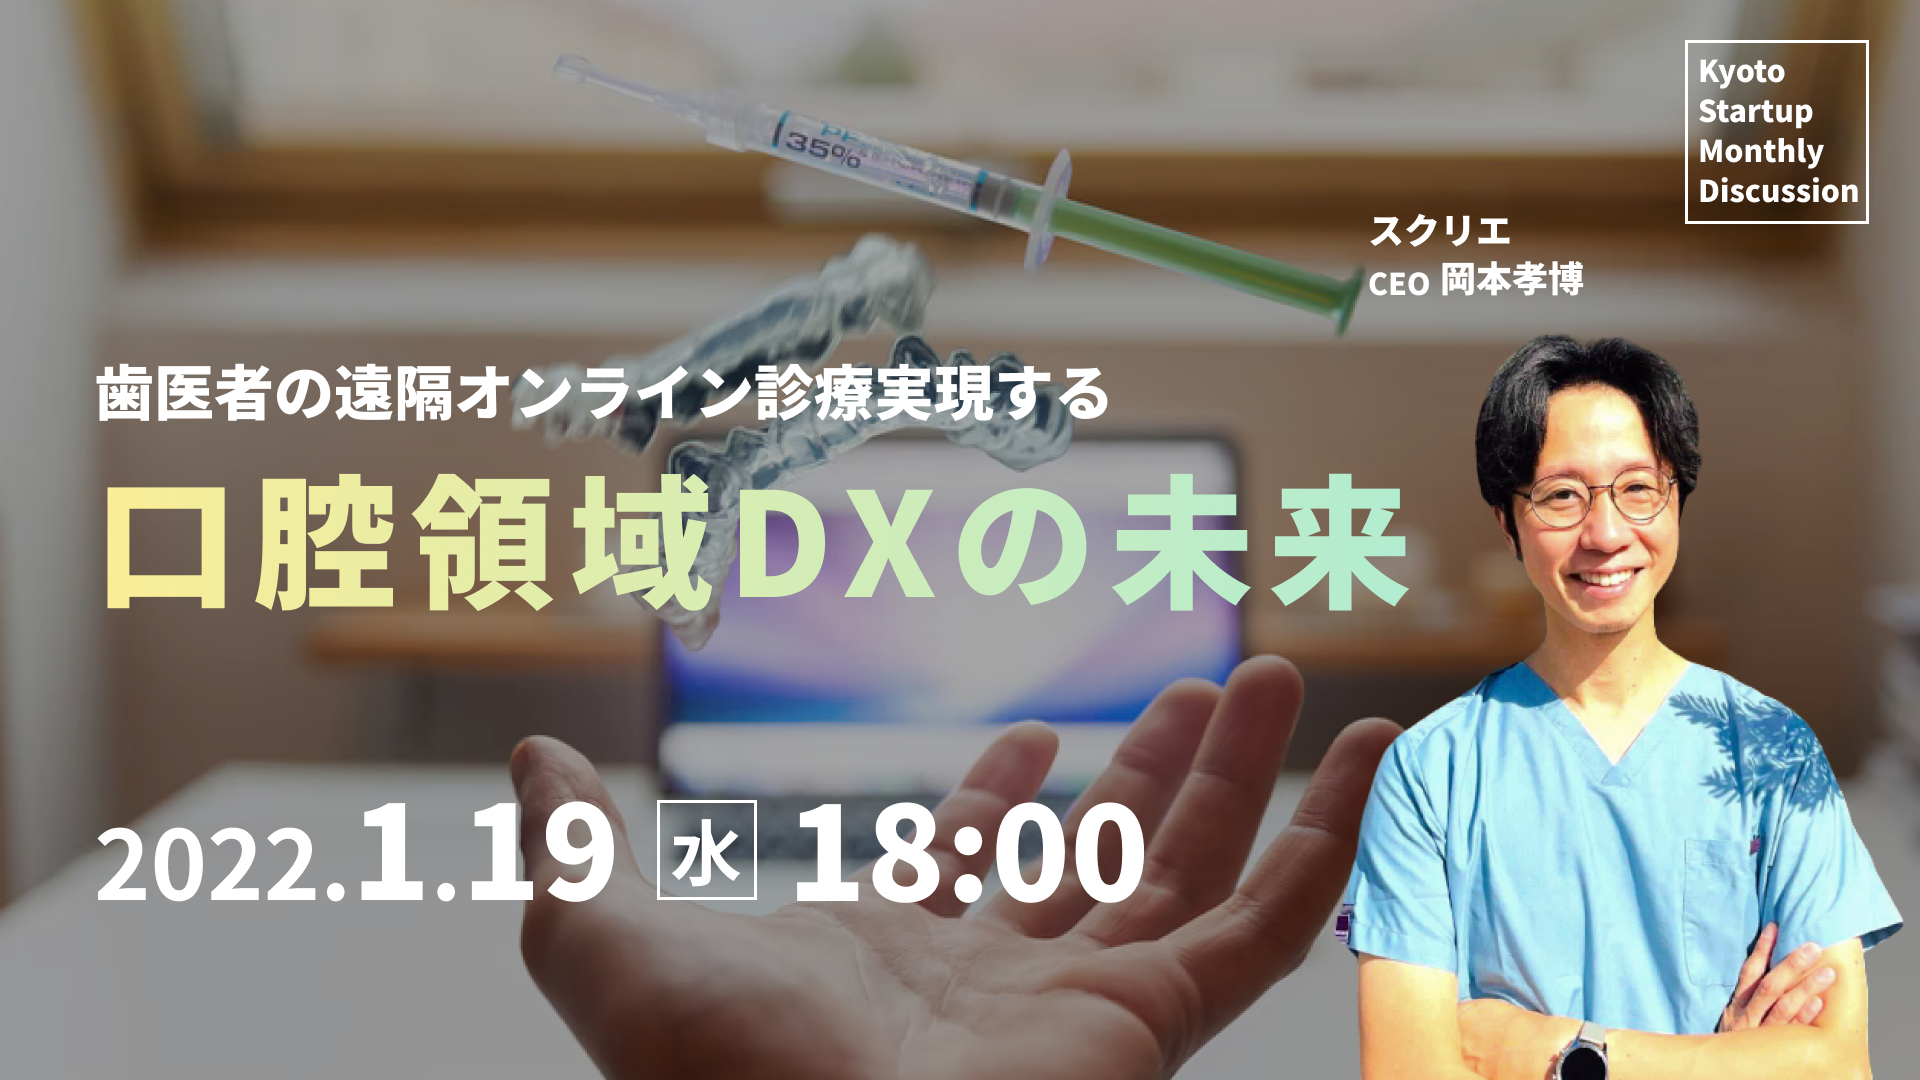 Kyoto Startup Monthly Discussion #08レポート（2022/1/19開催）